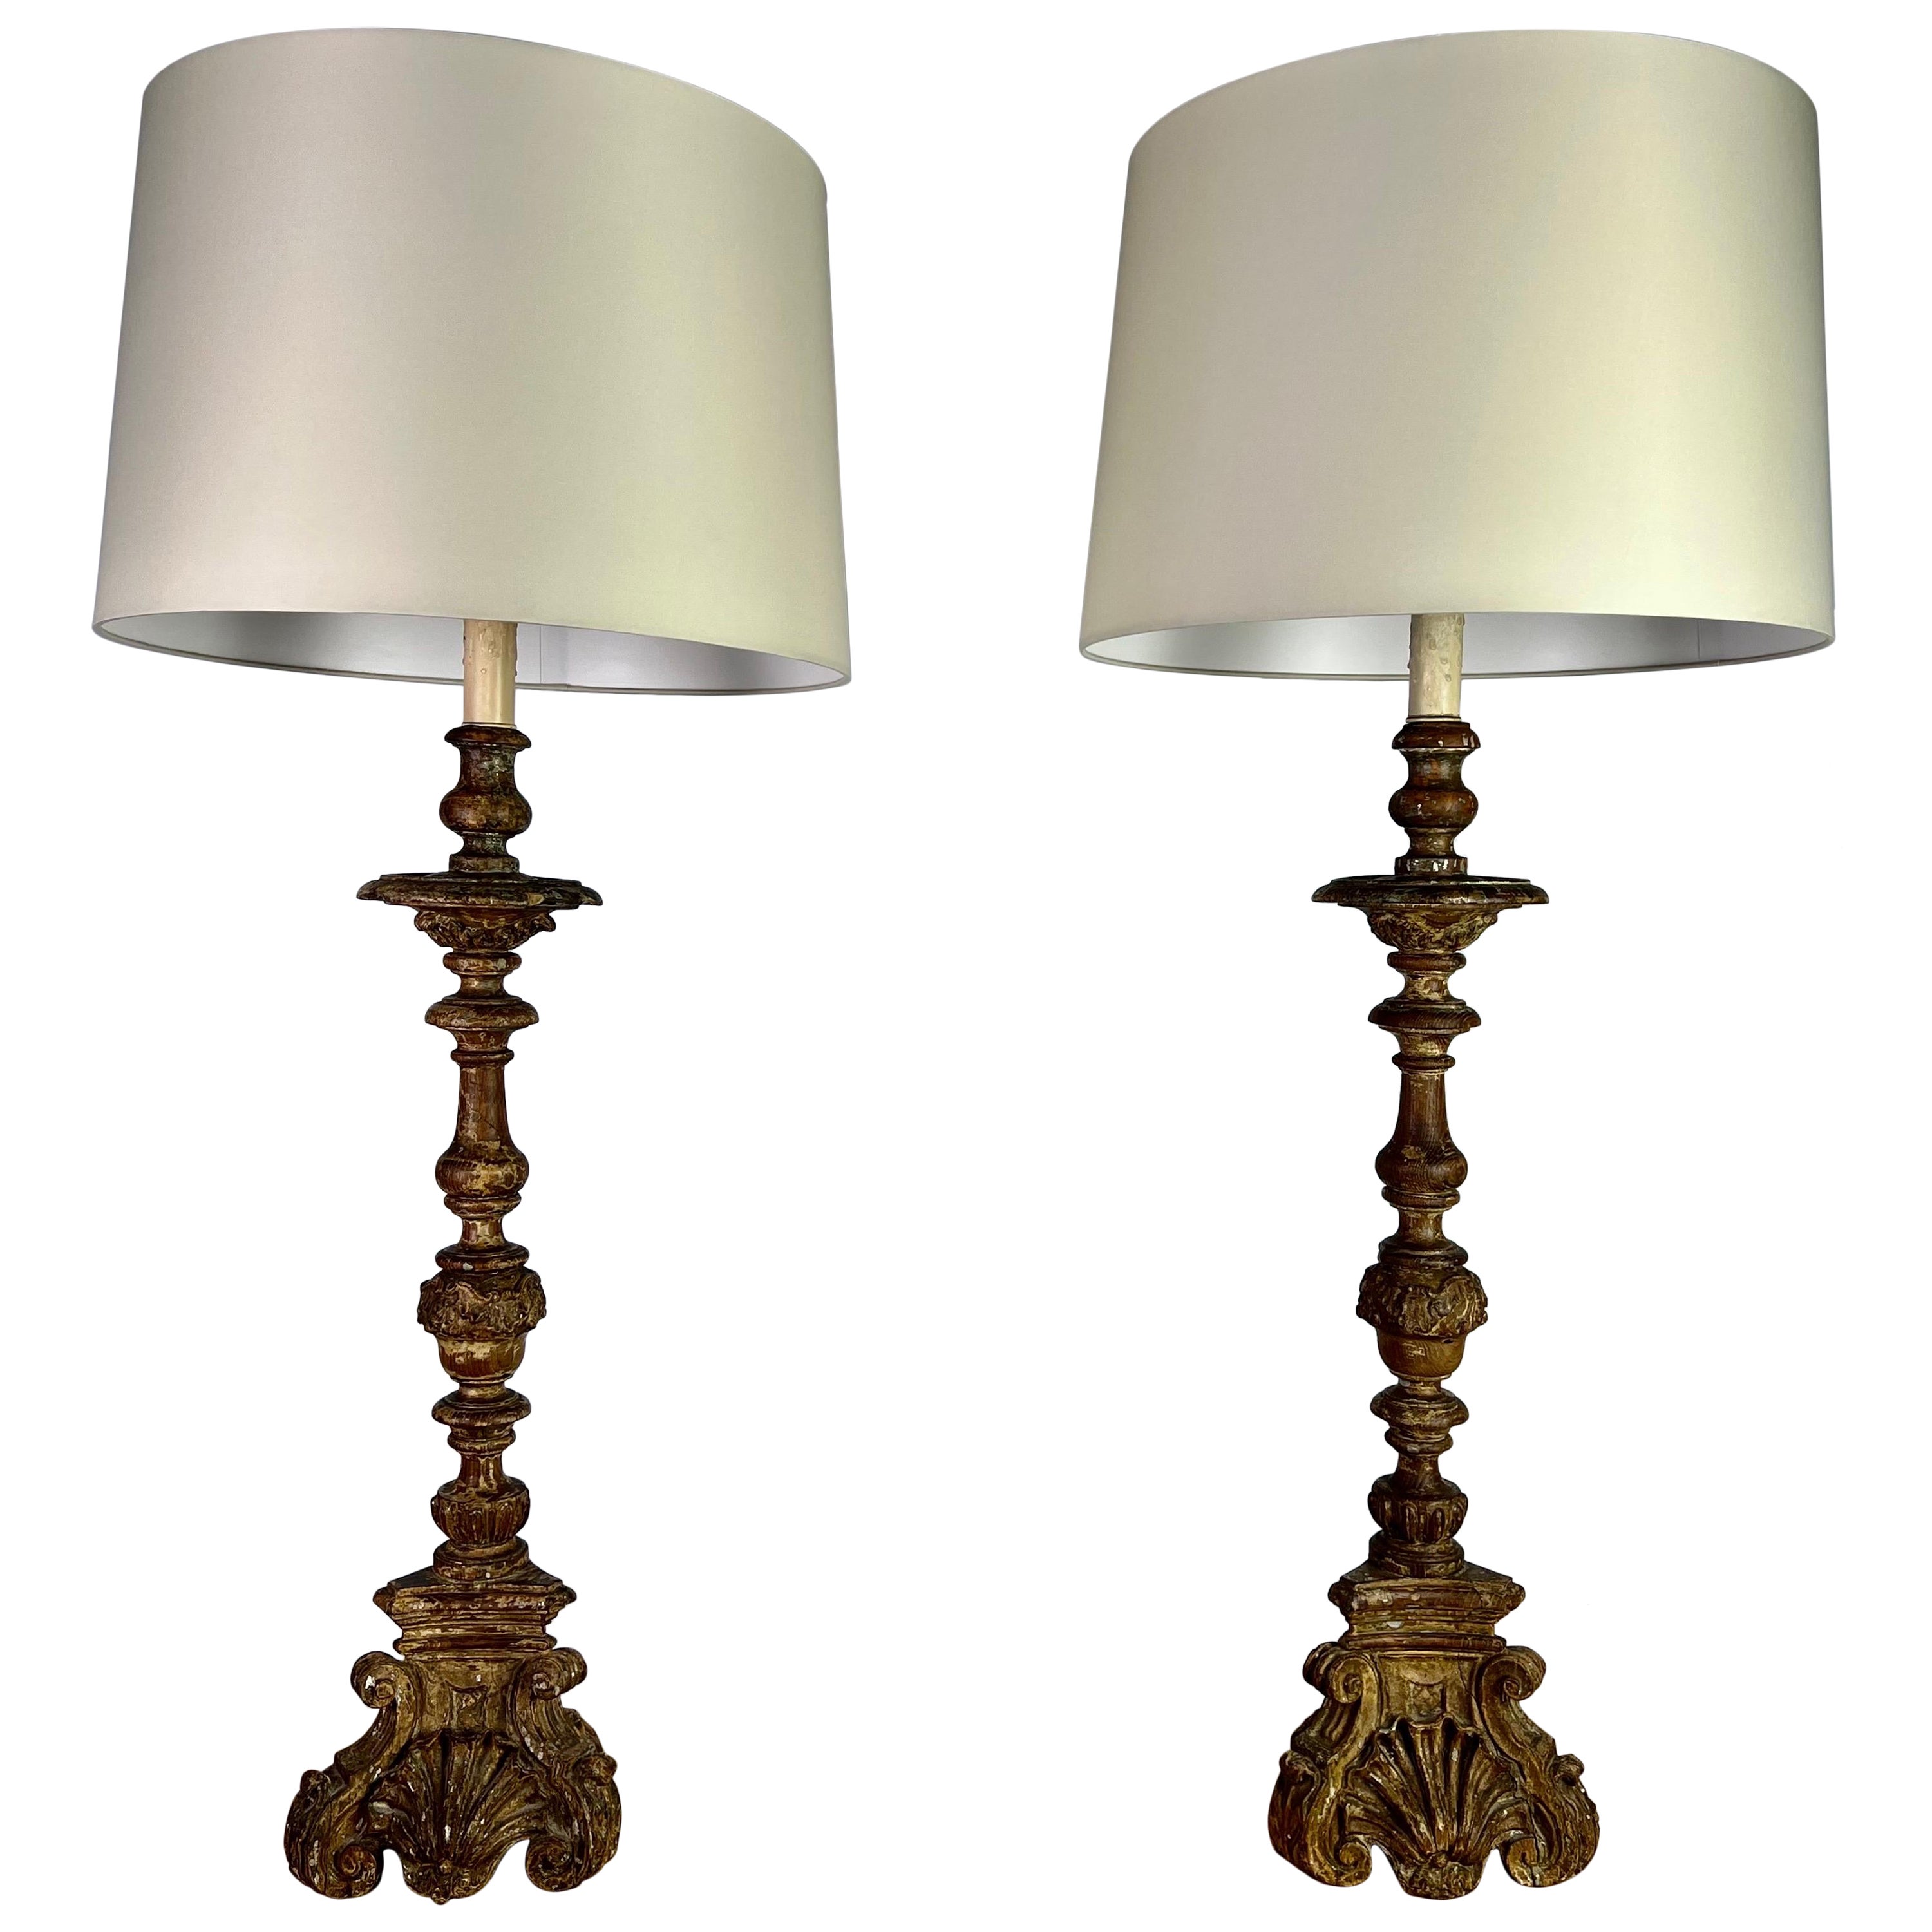 Pair of 19th C. Italian Candlestick Lamps W/ Shades